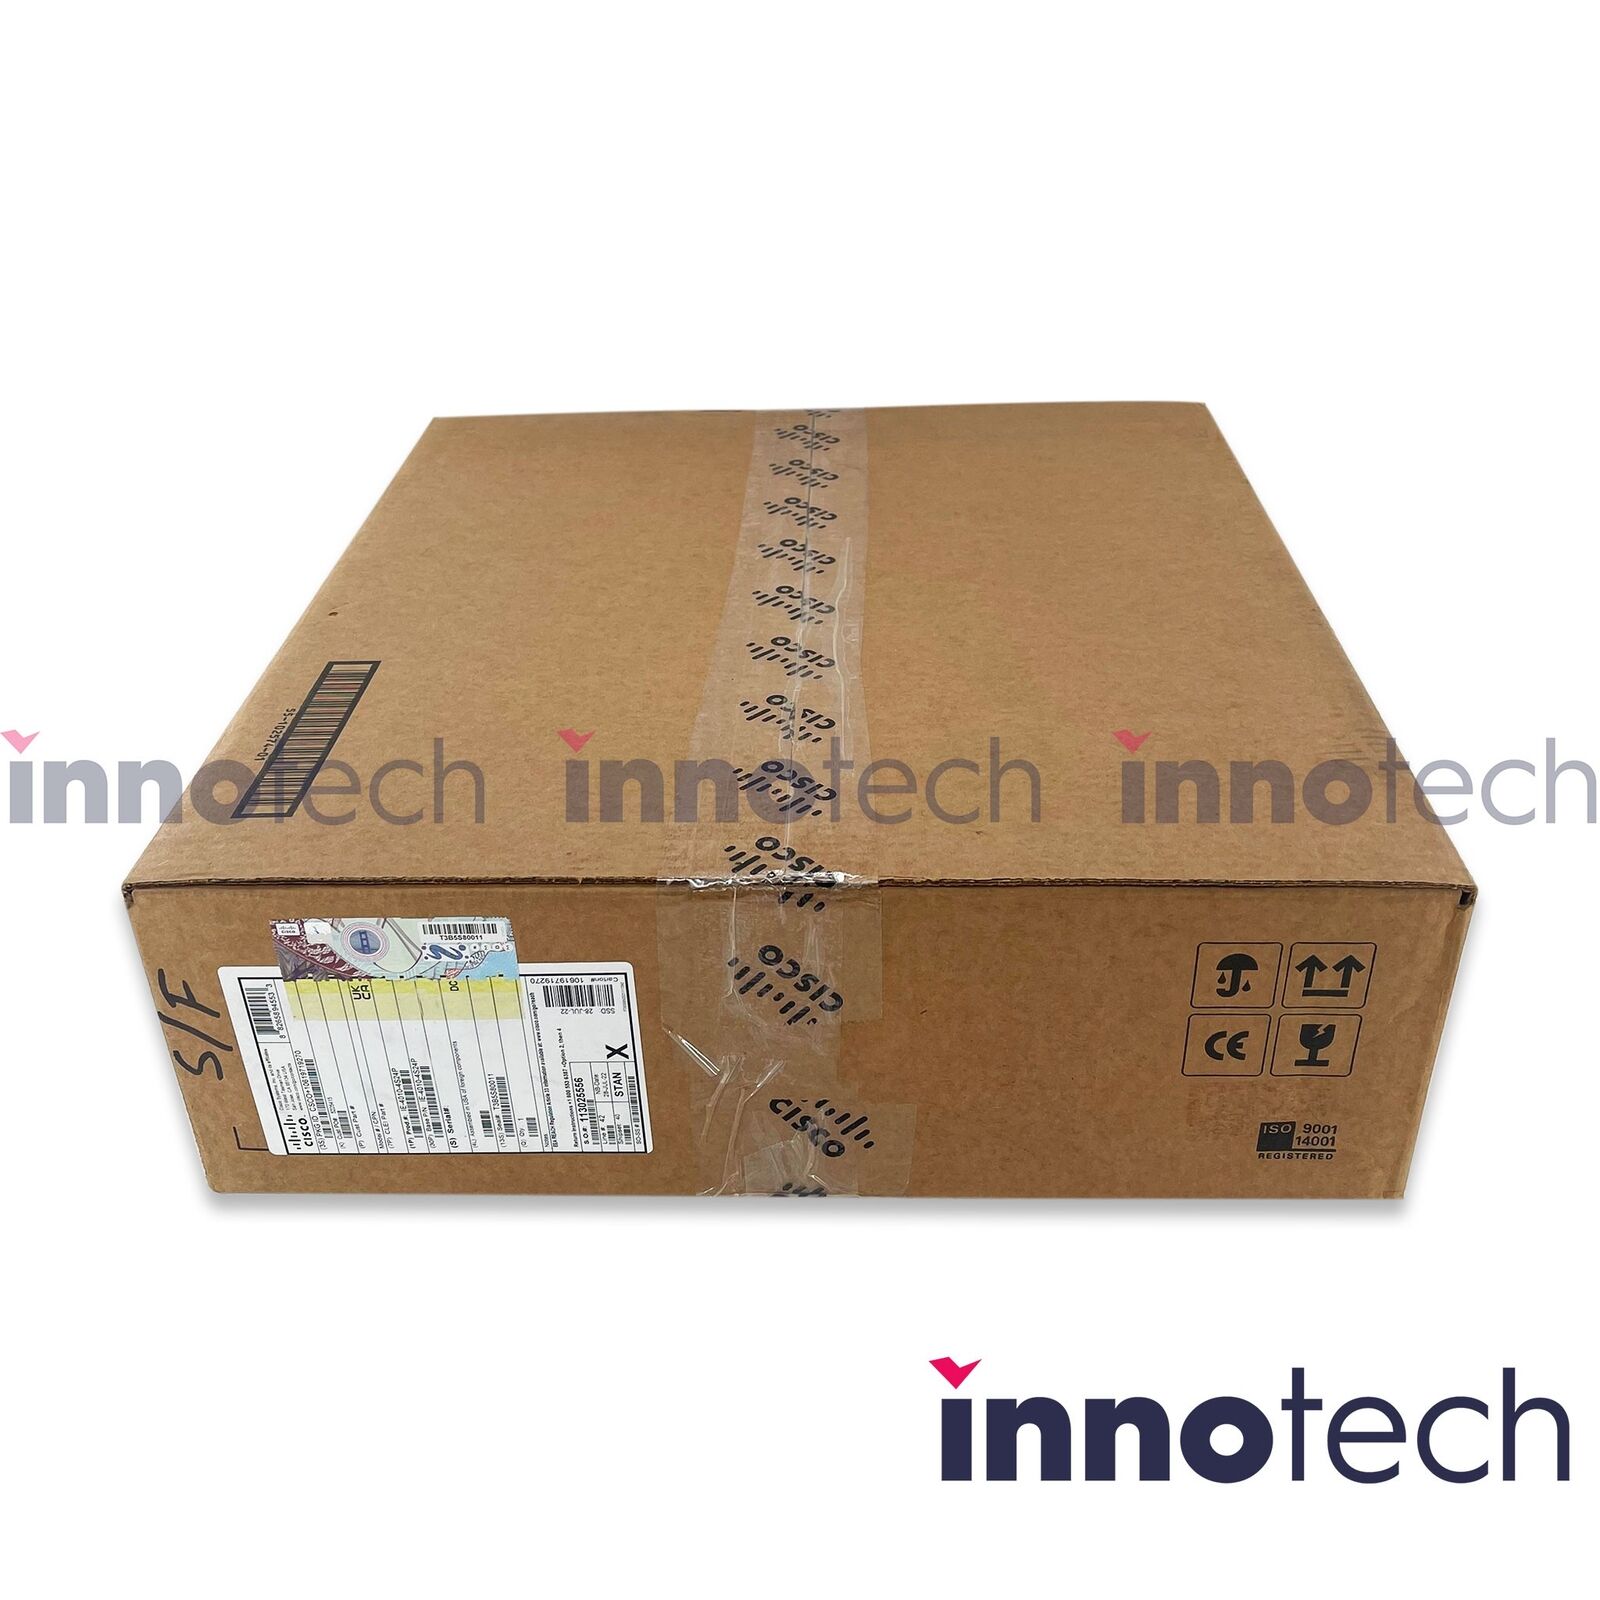 Cisco IE-4010-4S24P with Single PWR-RGD-AC-DC-250 Ethernet Switch New Open Box